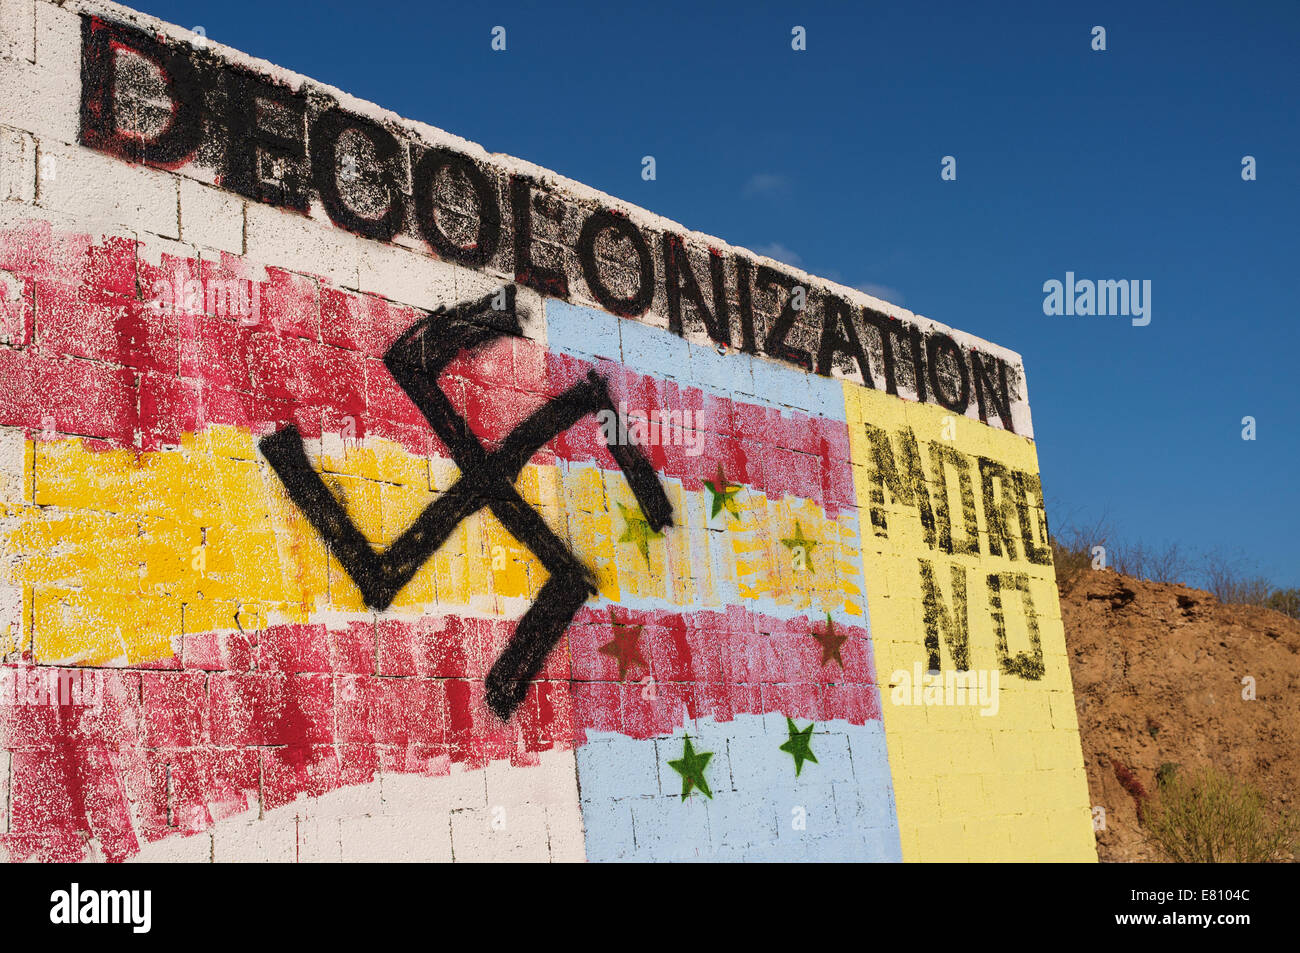 Graffiti on a wall in front of Guaza mountain, Tenerife, Canary Islands, Spain. The base is the flag of the canaries independence movement overpainted with the Spanish flag and swastika. Decolonization is a call for independence from Spain, and the Spanish flag, swastika and moro no have been added afterwards. Stock Photo